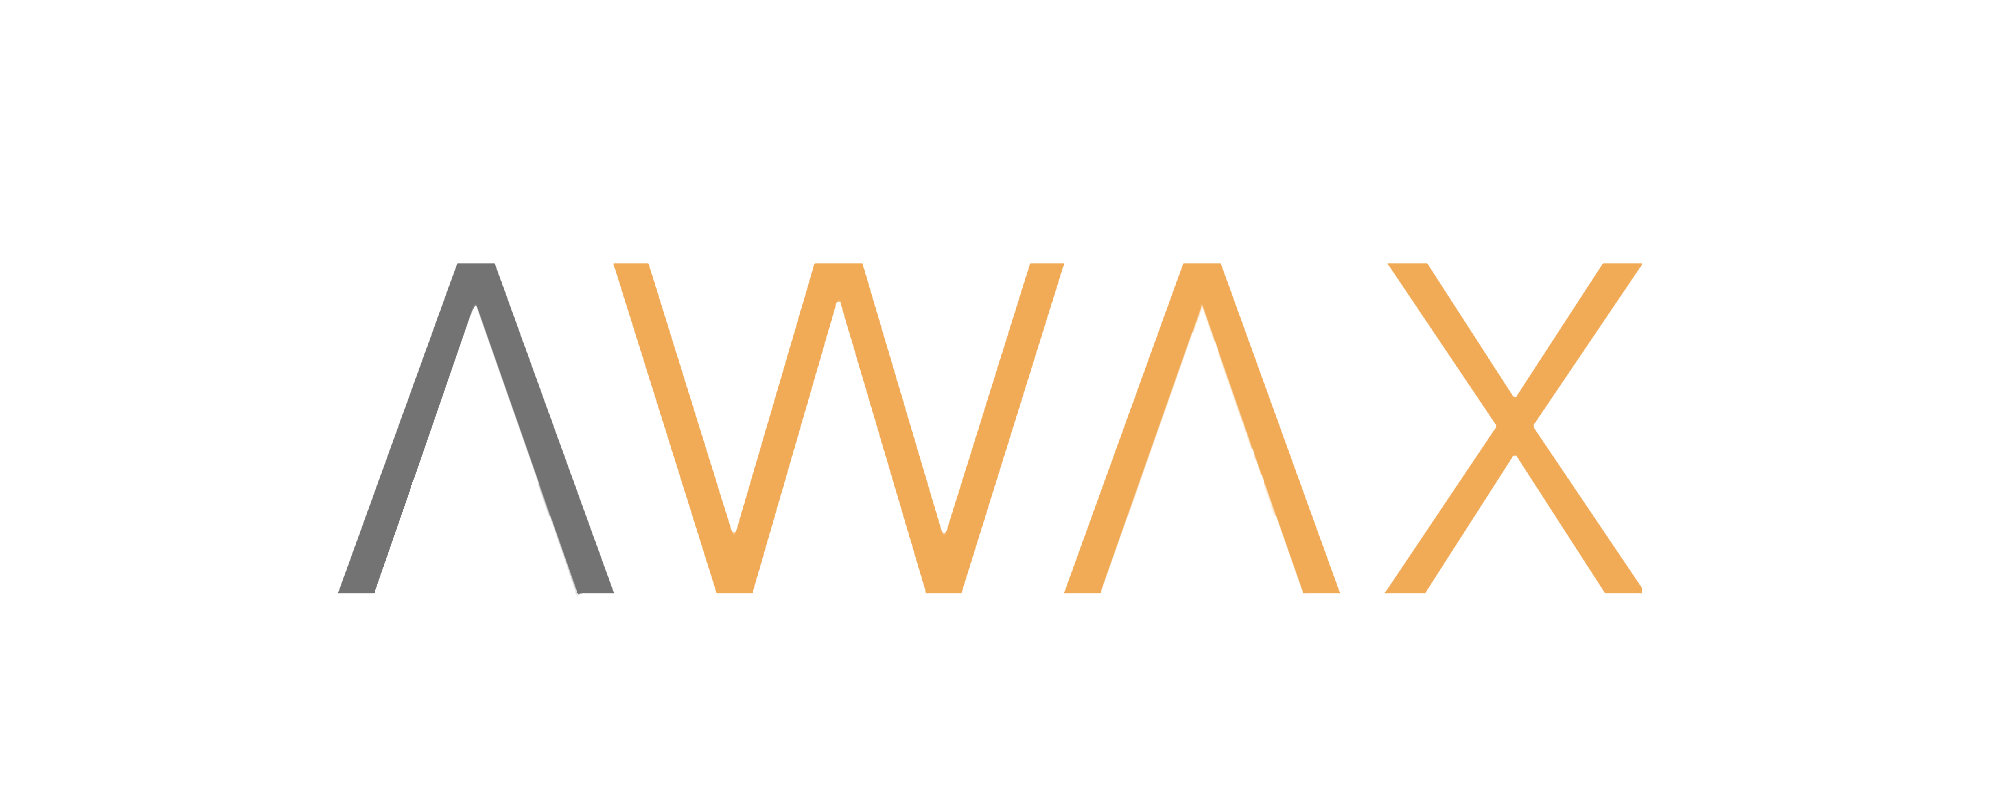 AWAX Group acquires Sasol Wax GmbH - AWAX - state of the art waxes